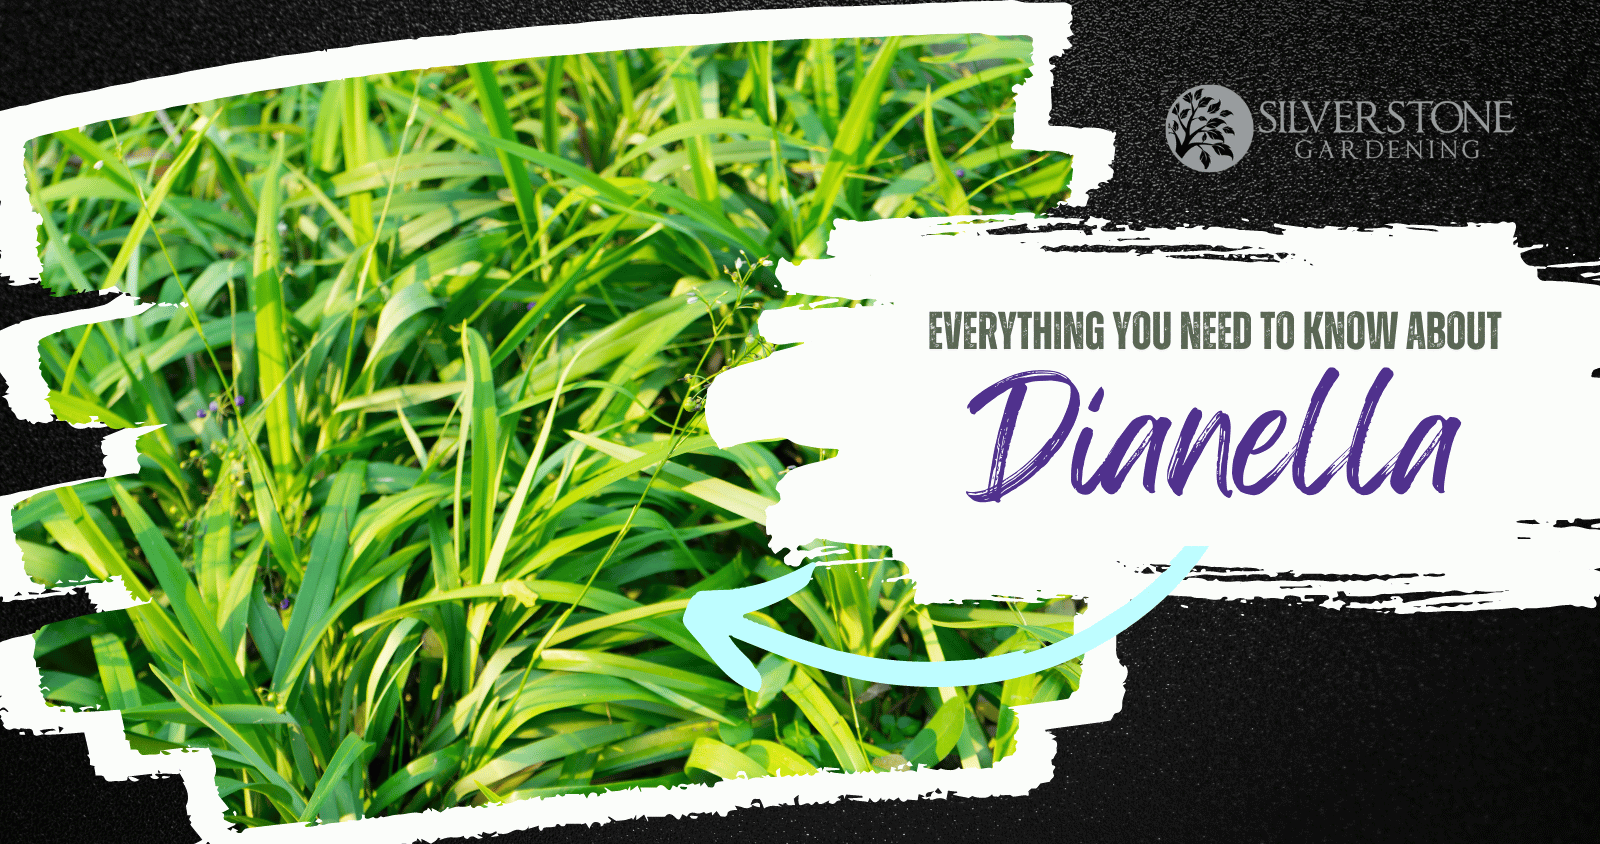 Everything you need to know about Dianella